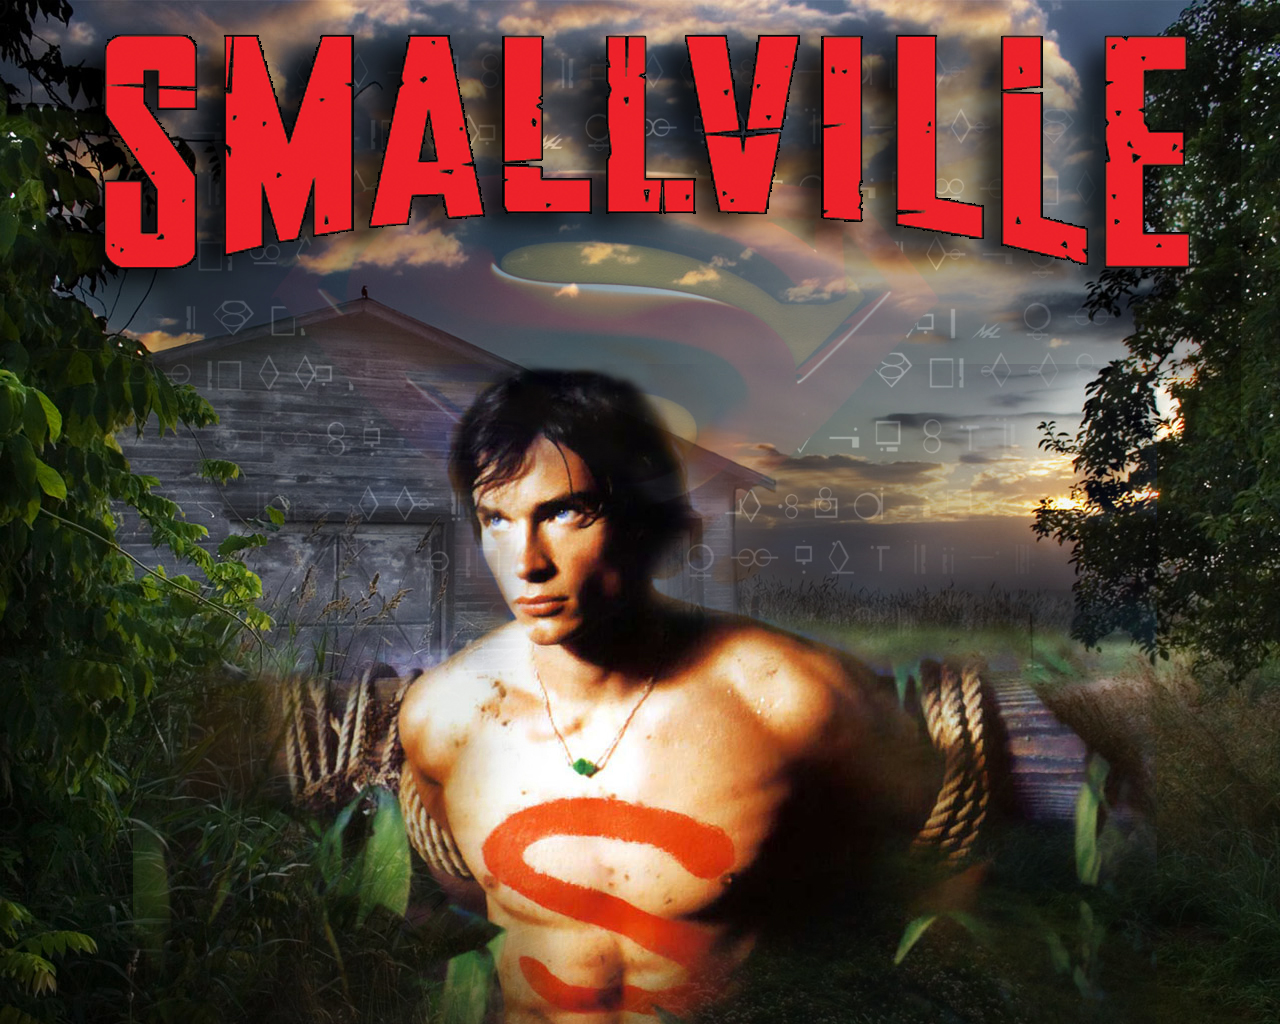 Download full size Smallville wallpaper / Movies / 1280x1024